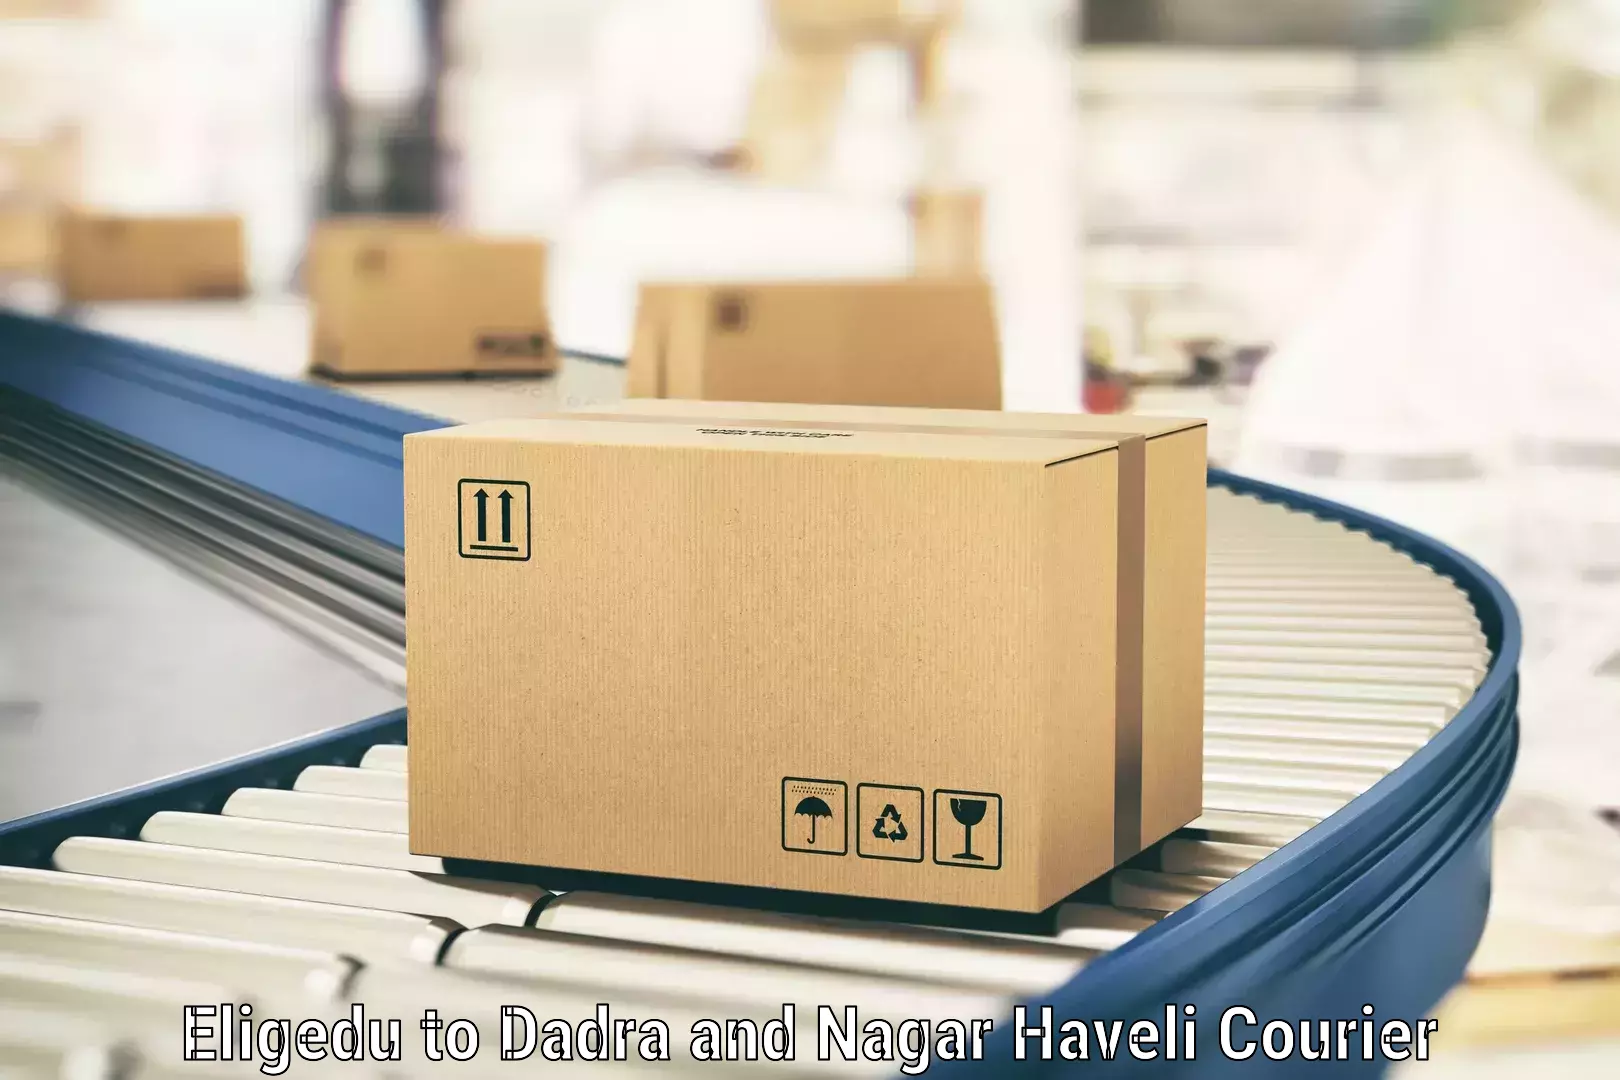 Heavy parcel delivery Eligedu to Dadra and Nagar Haveli